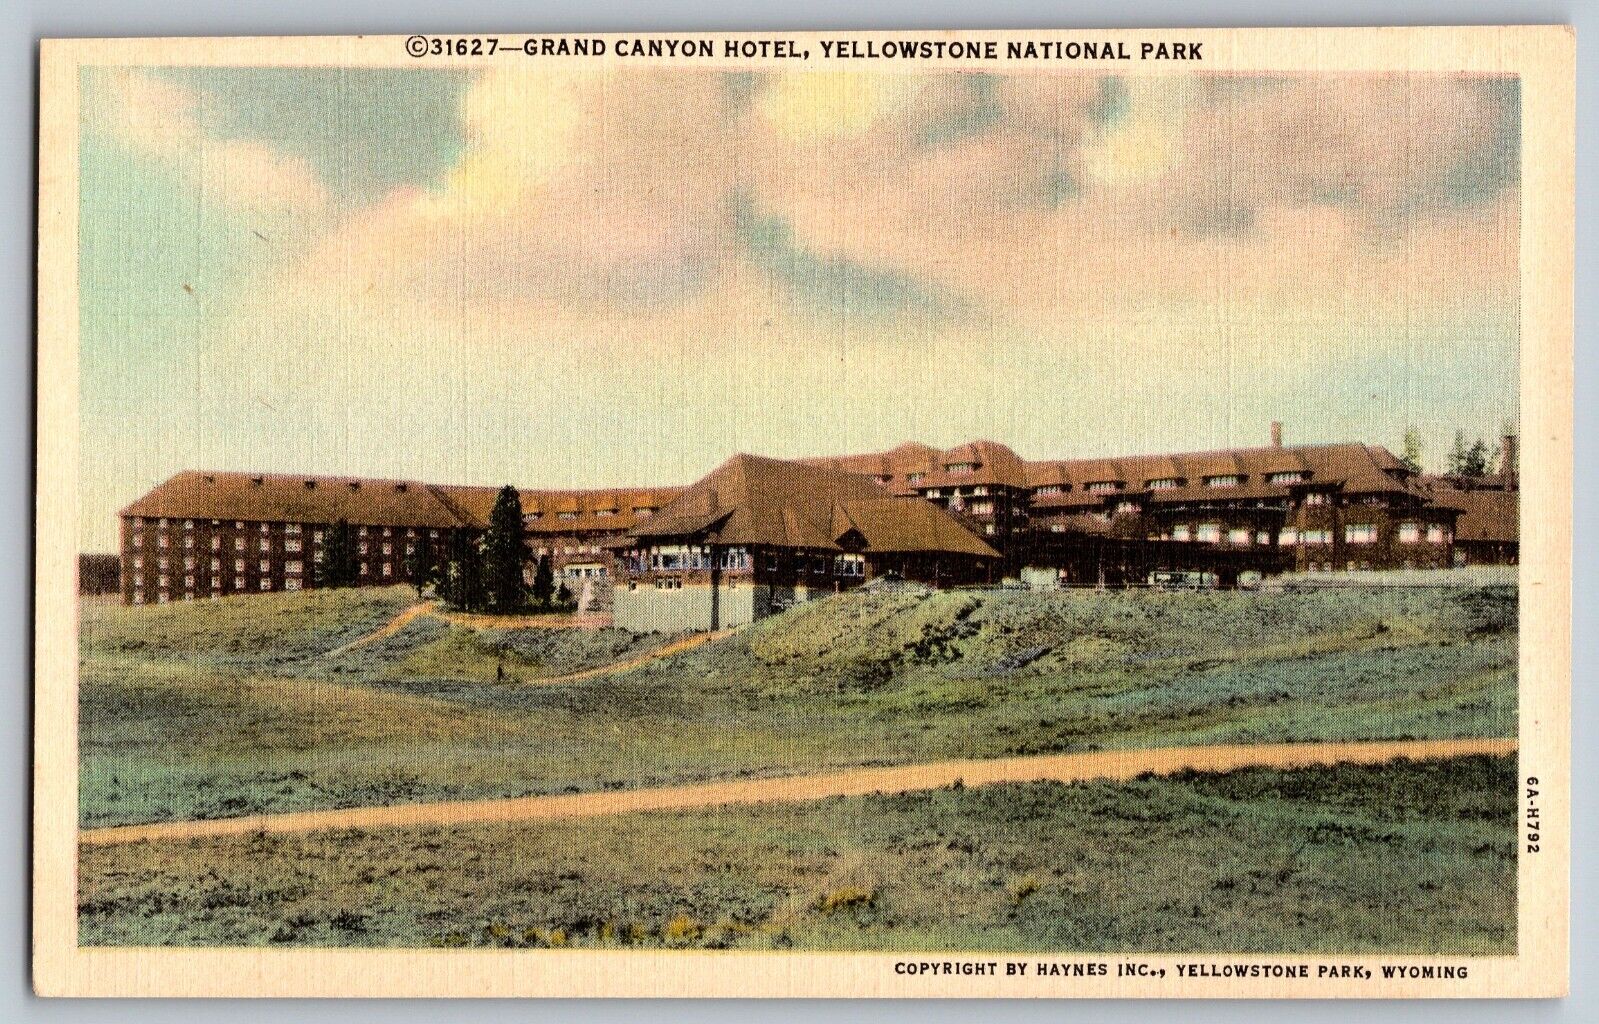 Wyoming WY - Grand Canyon Hotel - Yellowstone National Park - Vintage Postcard